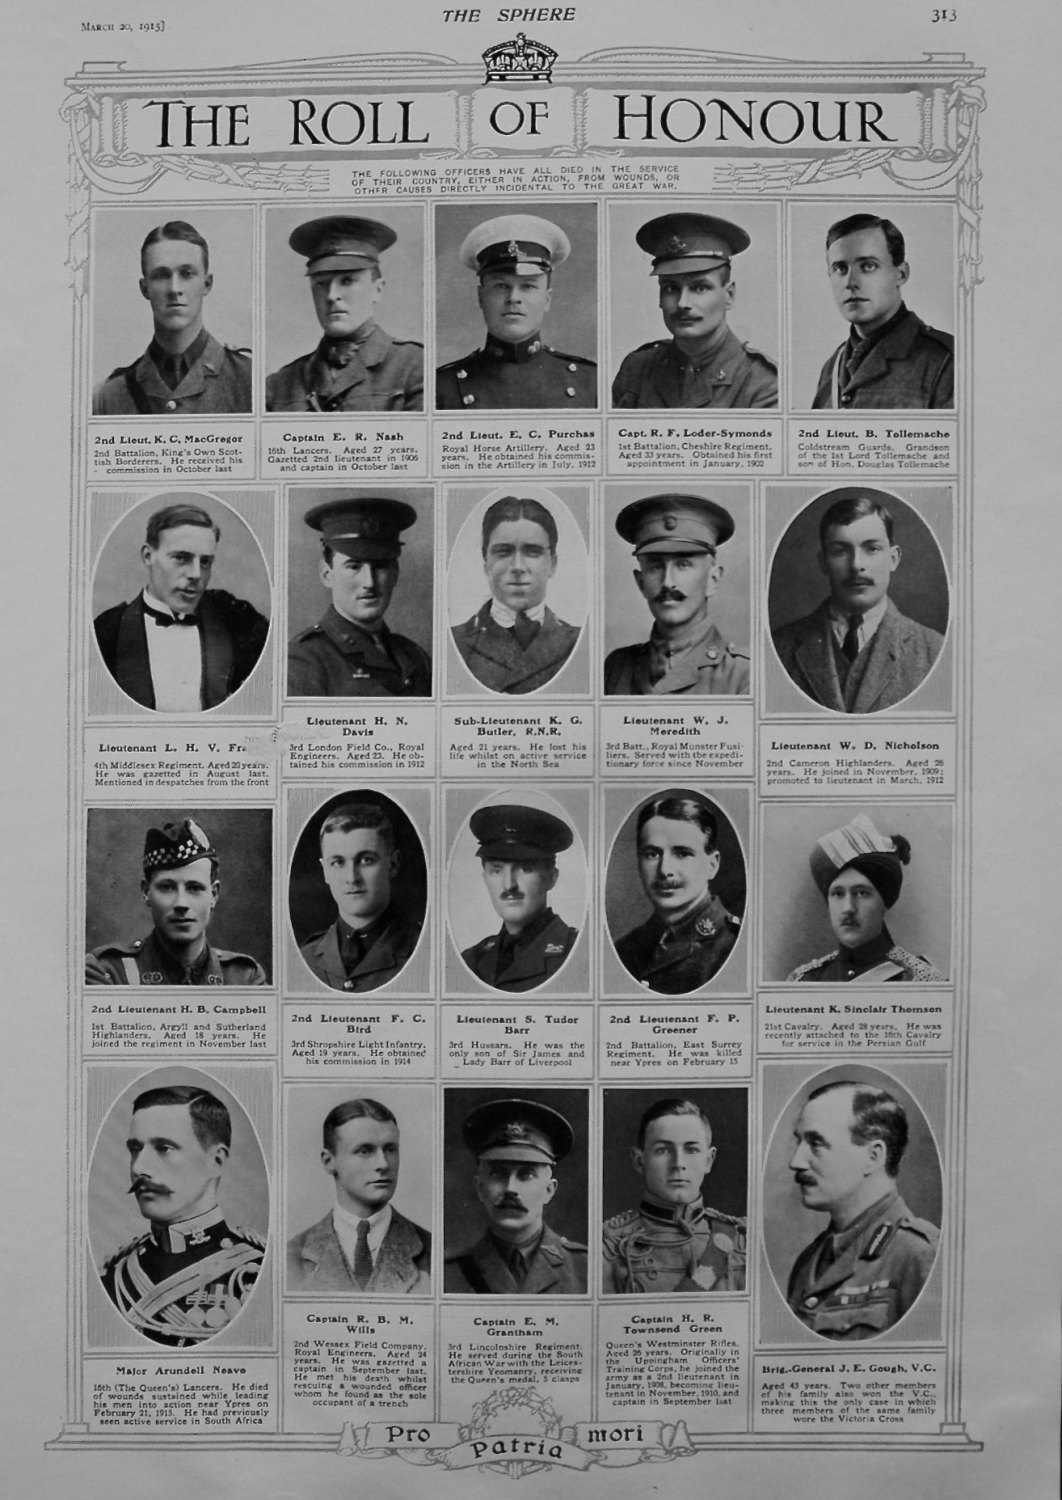 The Roll of Honour. March 20th, 1915.